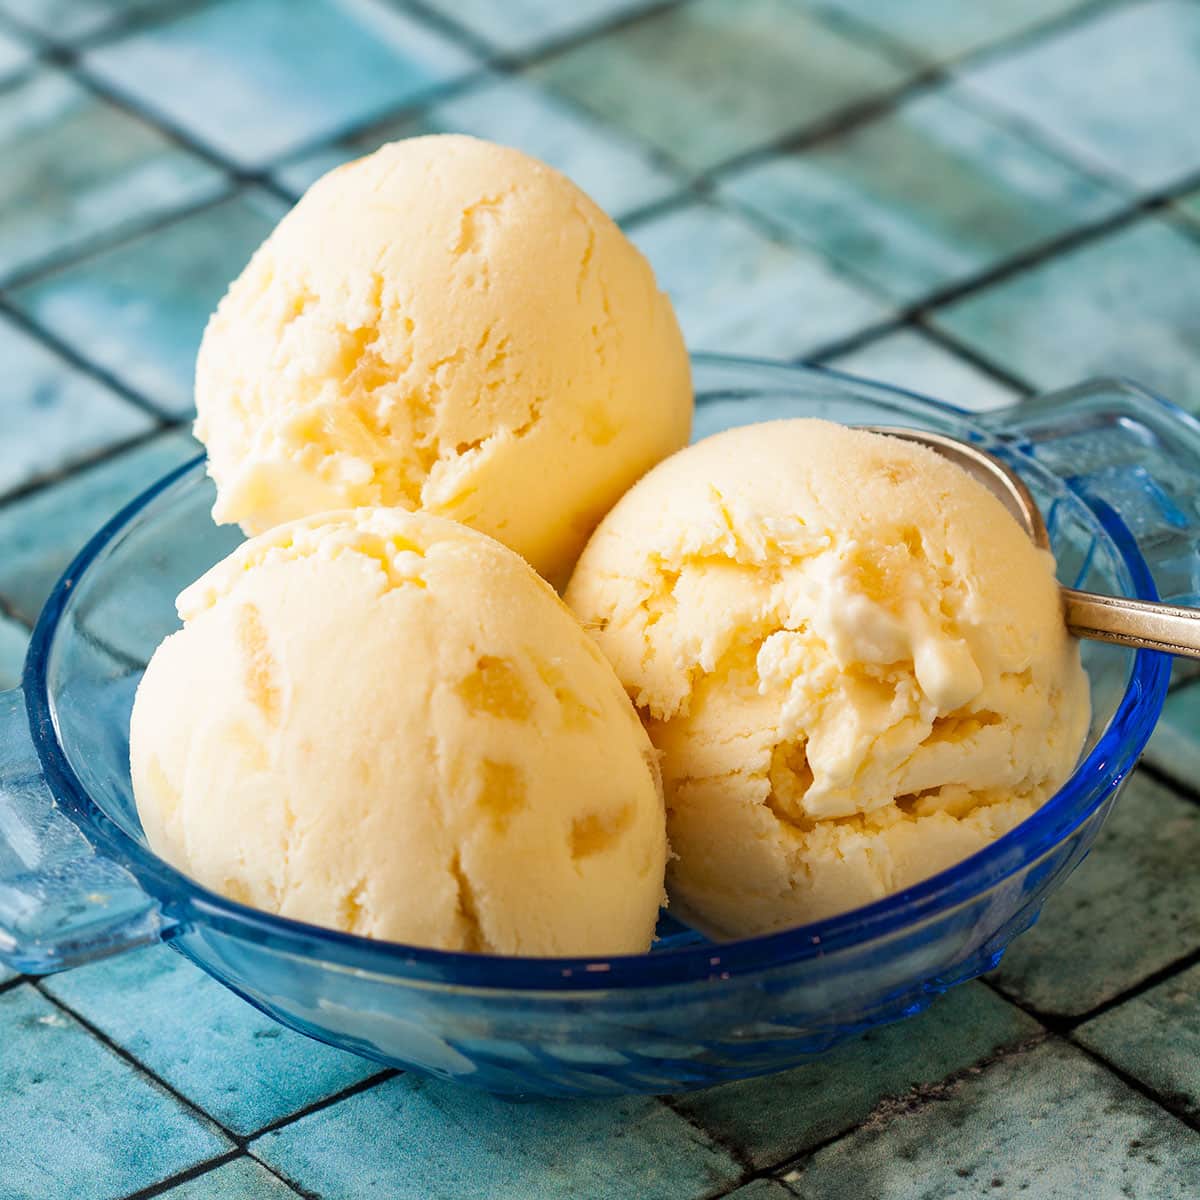 3 balls of stem ginger ice cream in a blue glass bowl.